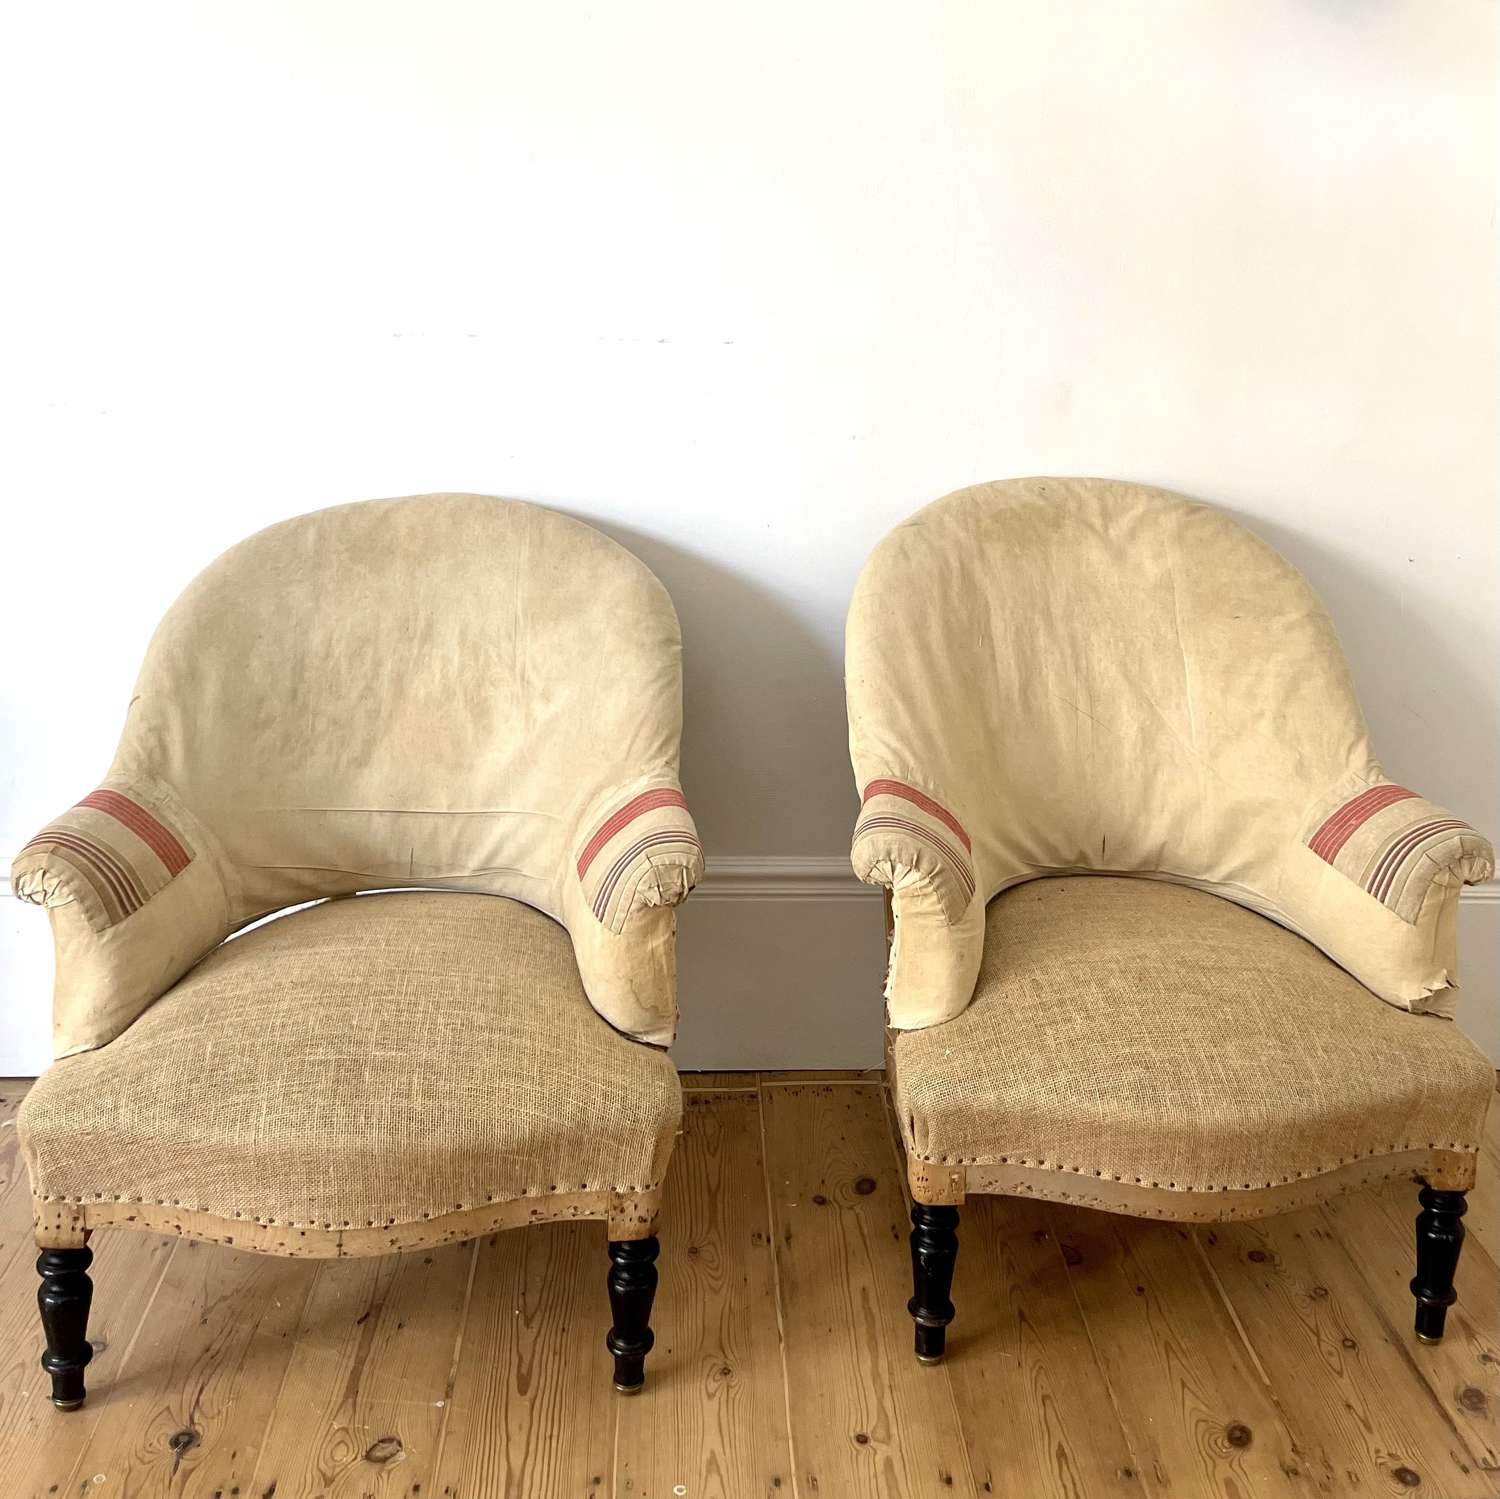 Pair of 19th century French chairs